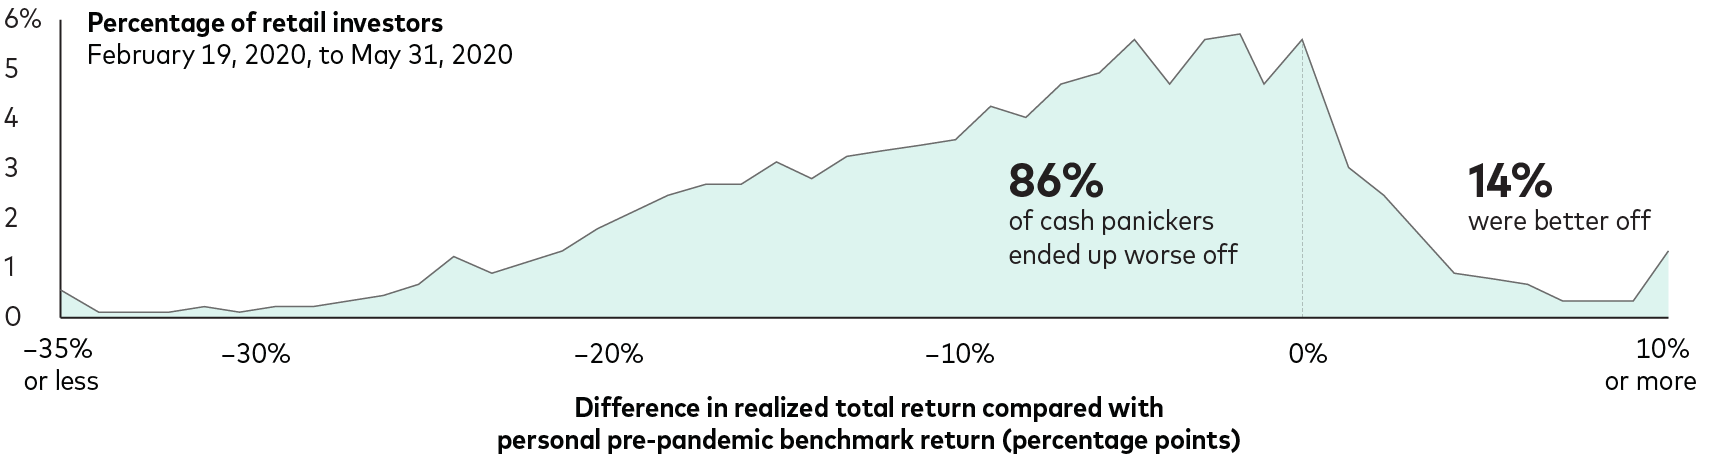 An area chart shows that 86% of investors experienced worse realized total returns compared to personal pre-pandemic benchmark returns; 14% of investors experienced better returns. 